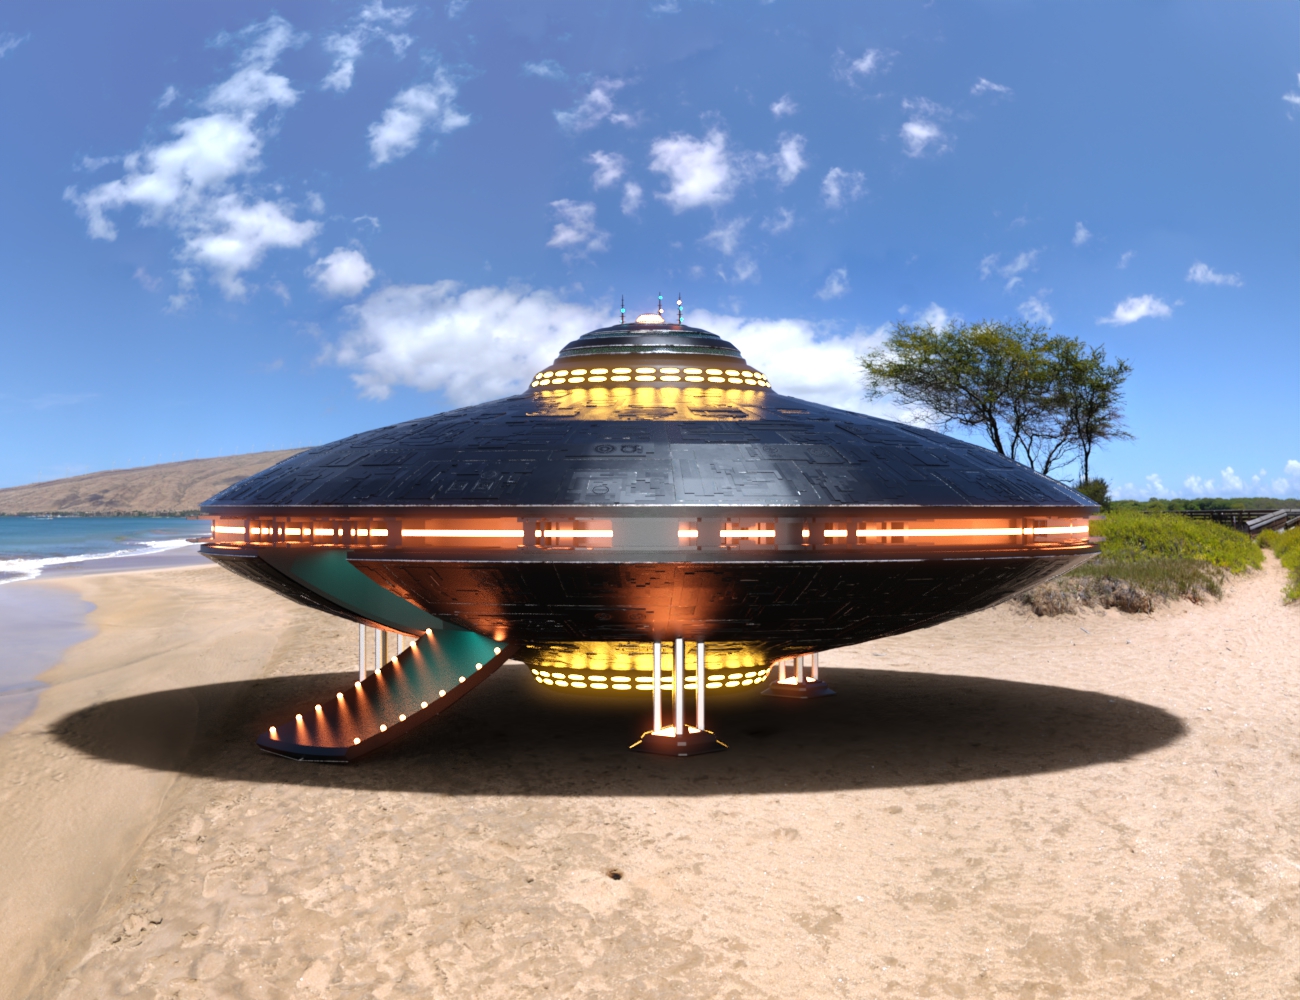 Invasion UFO by: AcharyaPolina, 3D Models by Daz 3D